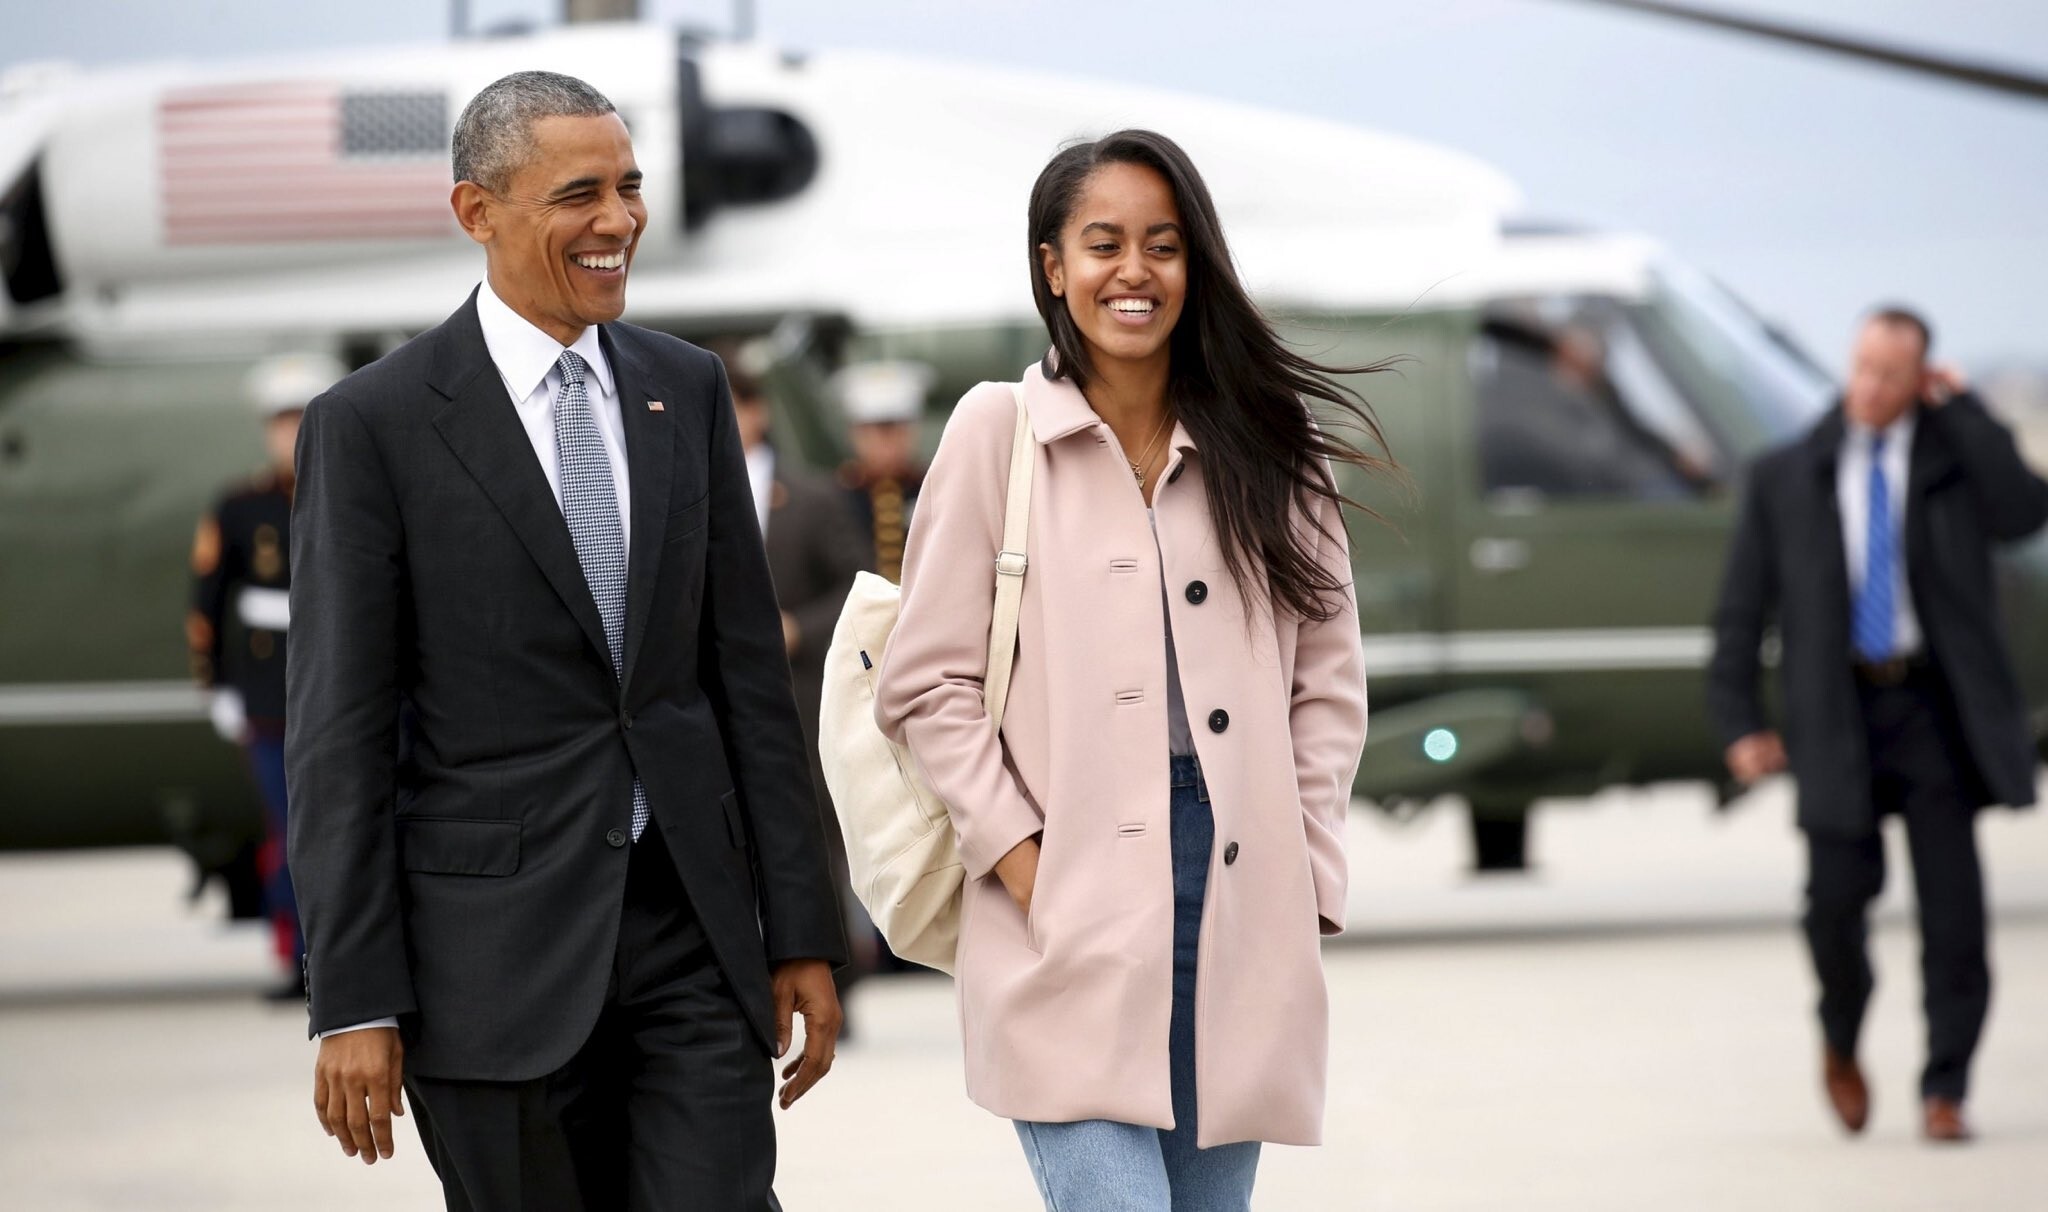 Malia Obama is the eldest daughter of Barack Obama, 44th president of the US. What’s she been doing since she and her family moved out of the White House? Photo: @Bald_Marley/Twitter